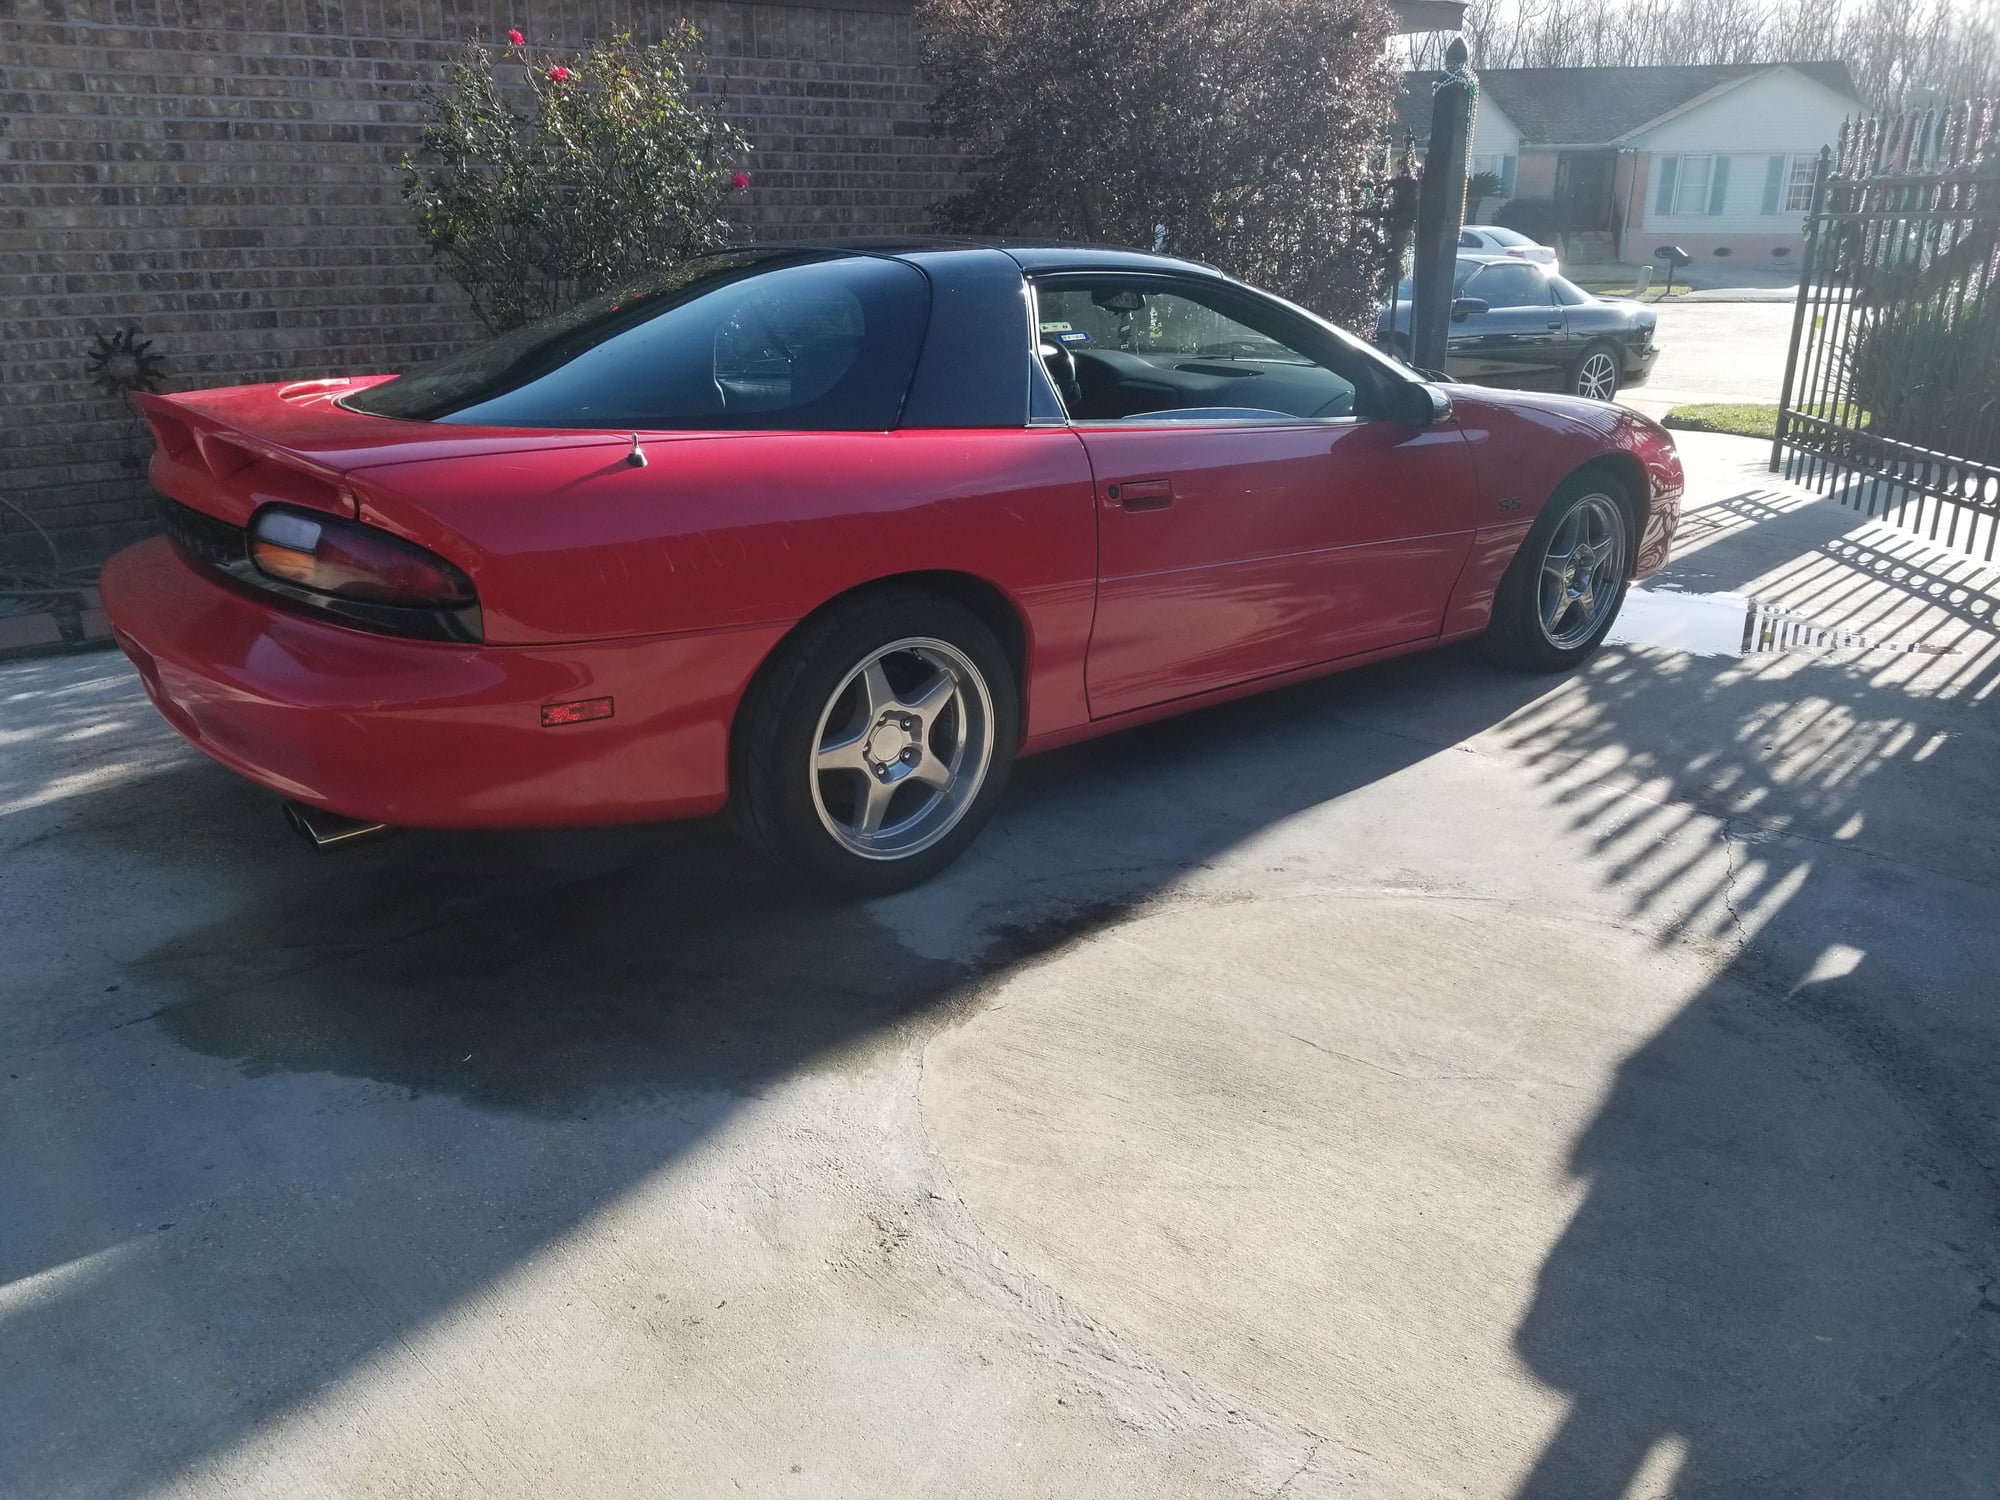 1999 Chevrolet Camaro - 1999 Slp SS Camaro - Used - VIN 2G1FP22G9X2121705 - 81,574 Miles - 8 cyl - 2WD - Manual - Coupe - Red - New Orleans, LA 70127, United States